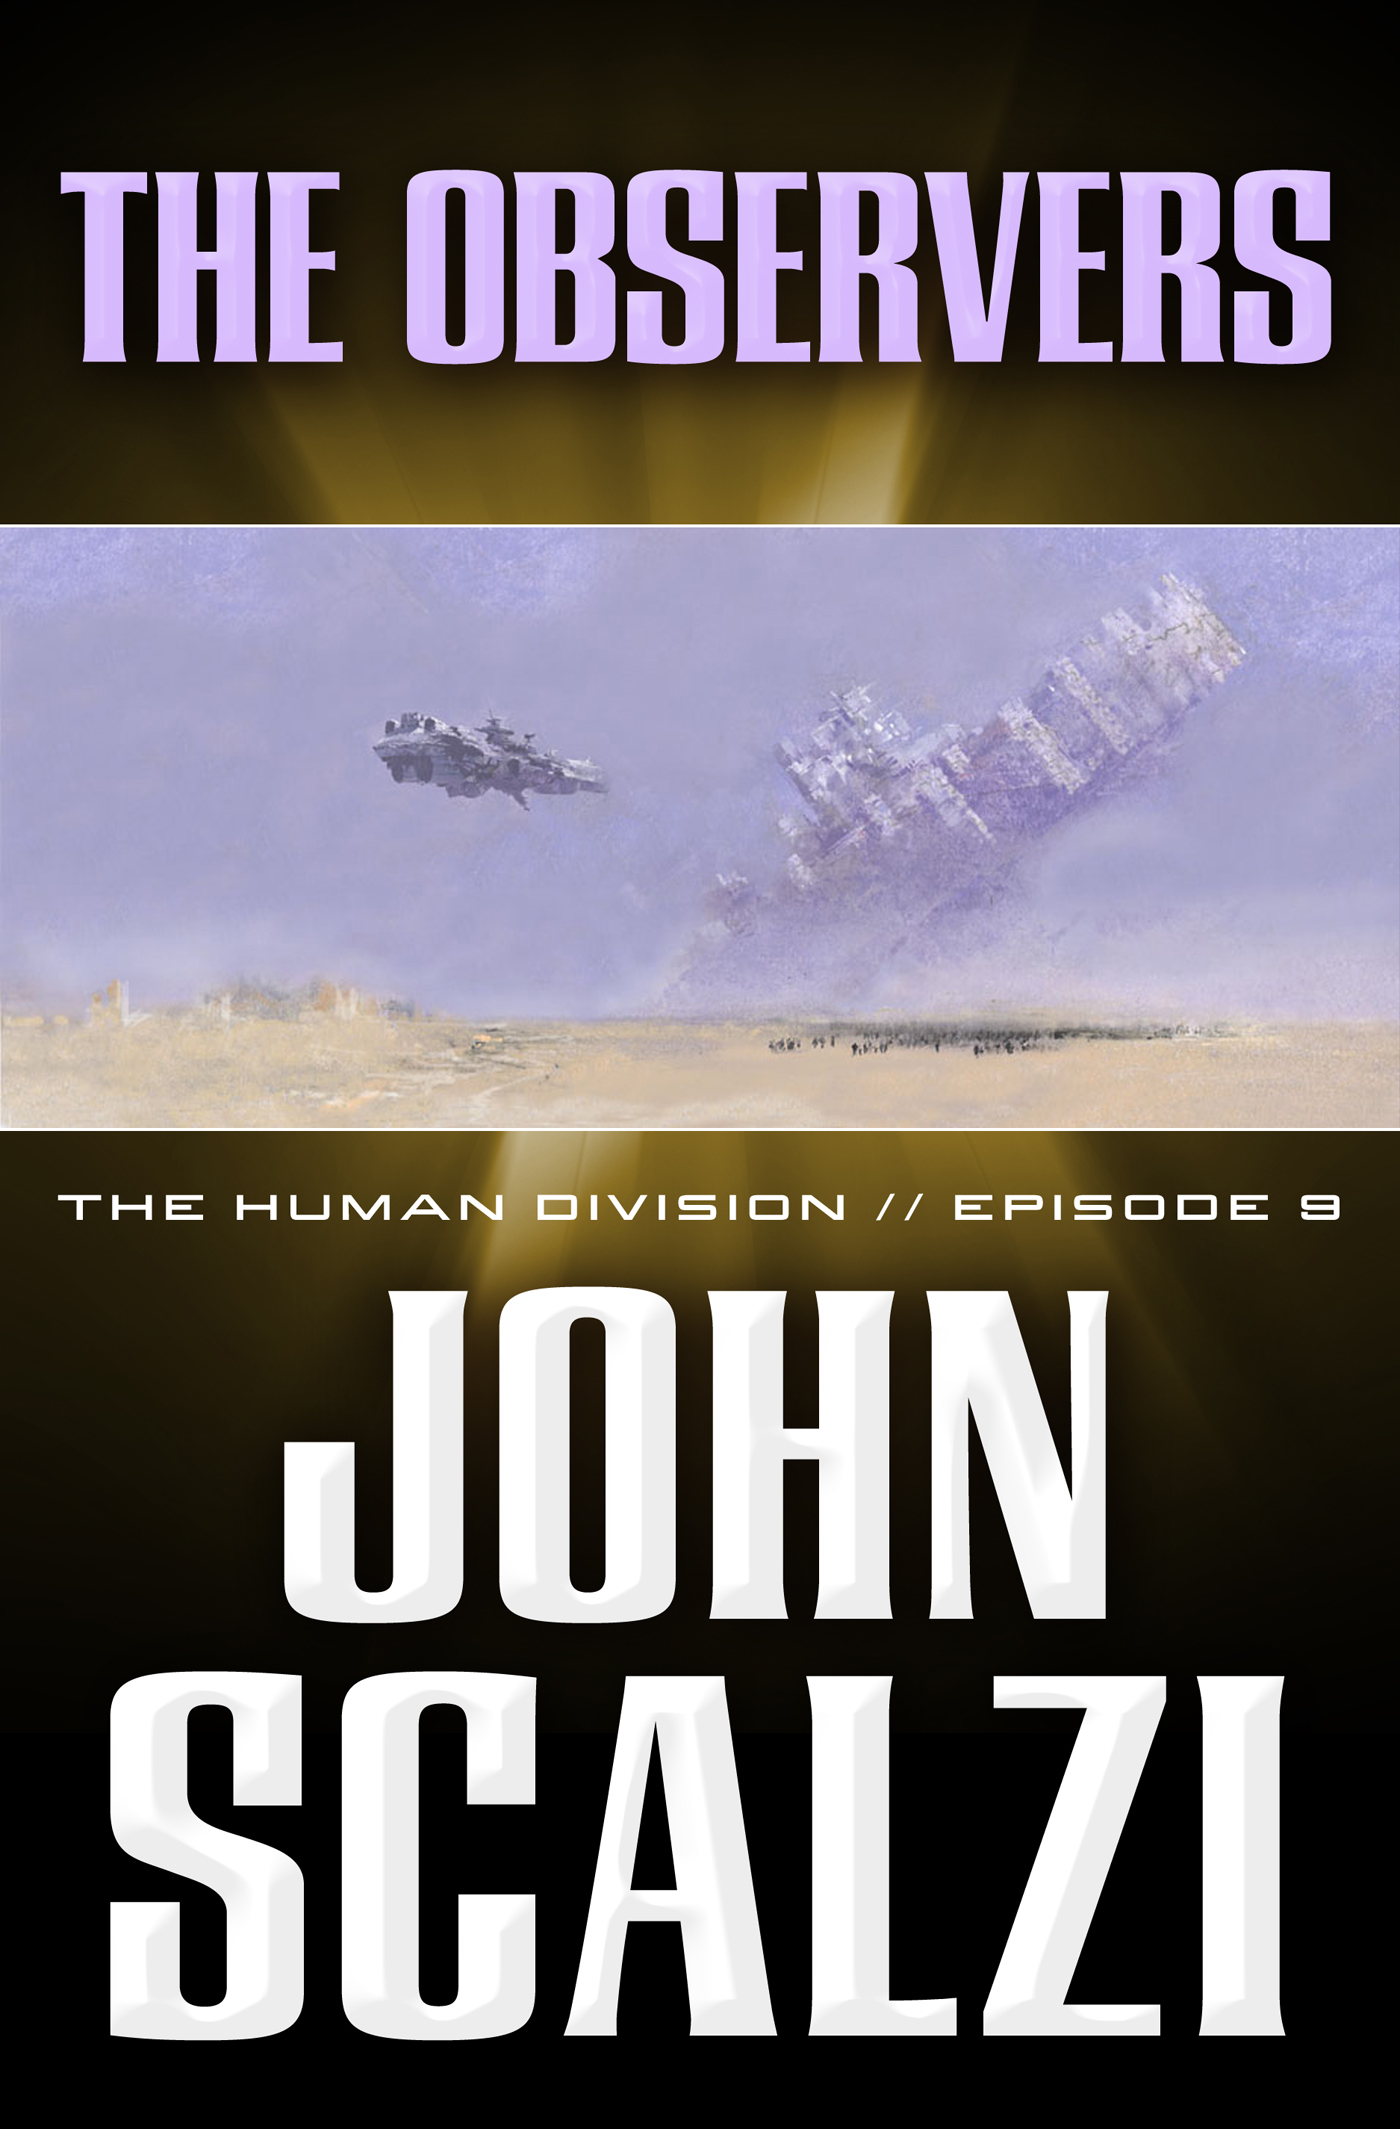 The Human Division #9: The Observers by John Scalzi